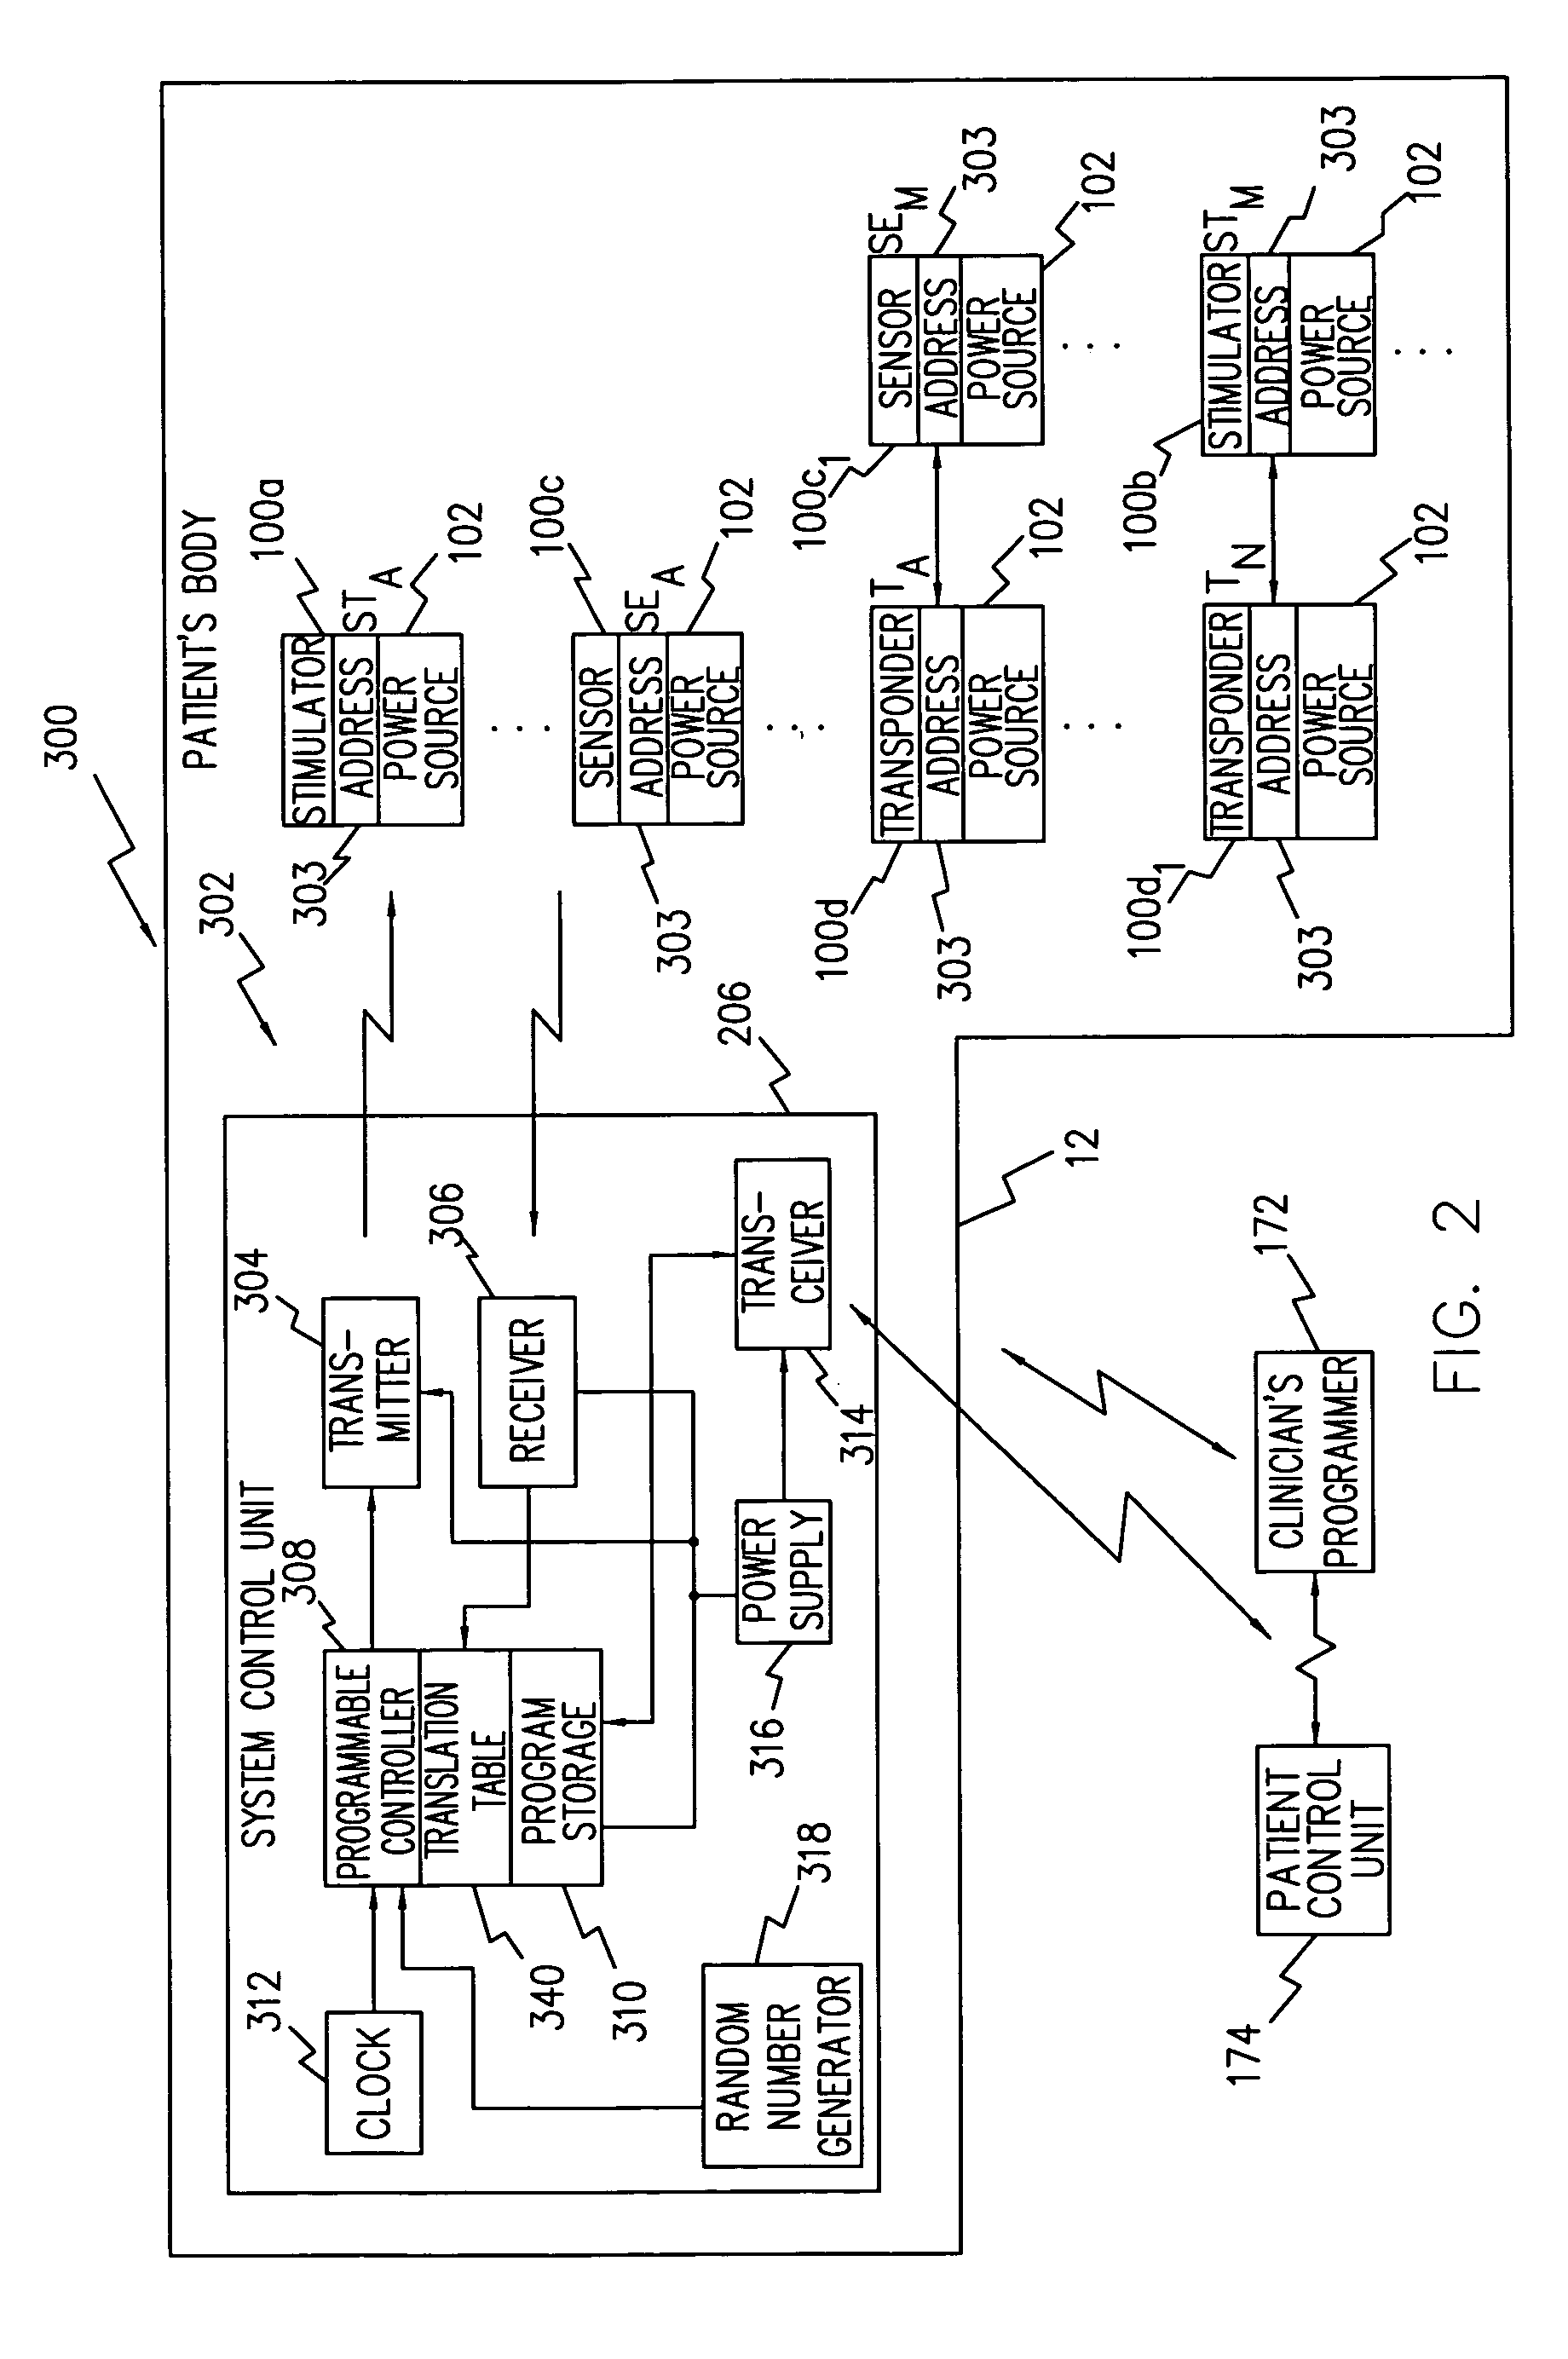 System and method for sharing a common communication channel between multiple systems of implantable medical devices